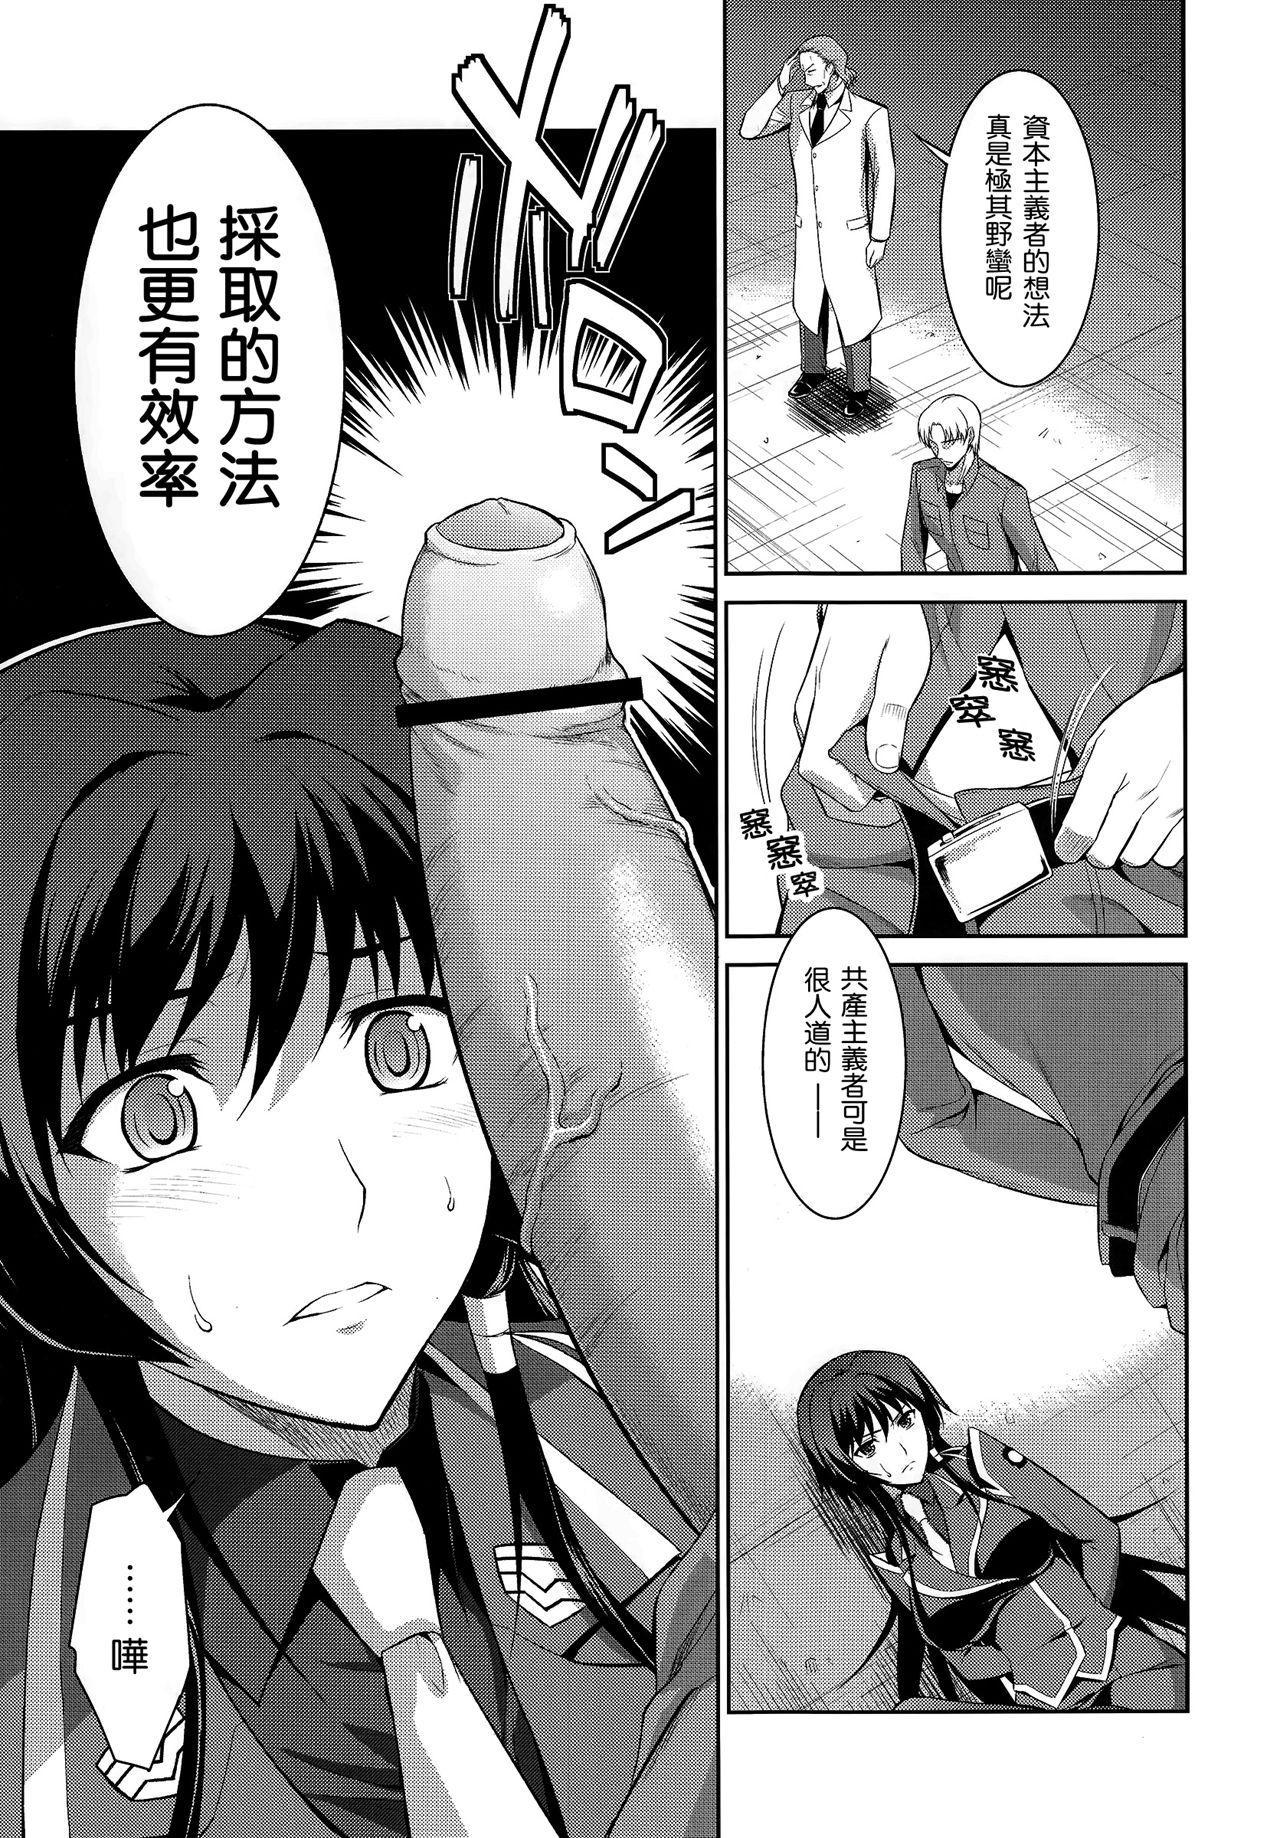 Milf Sex Ouka Chiru! - Muv-luv alternative total eclipse Webcamchat - Page 7